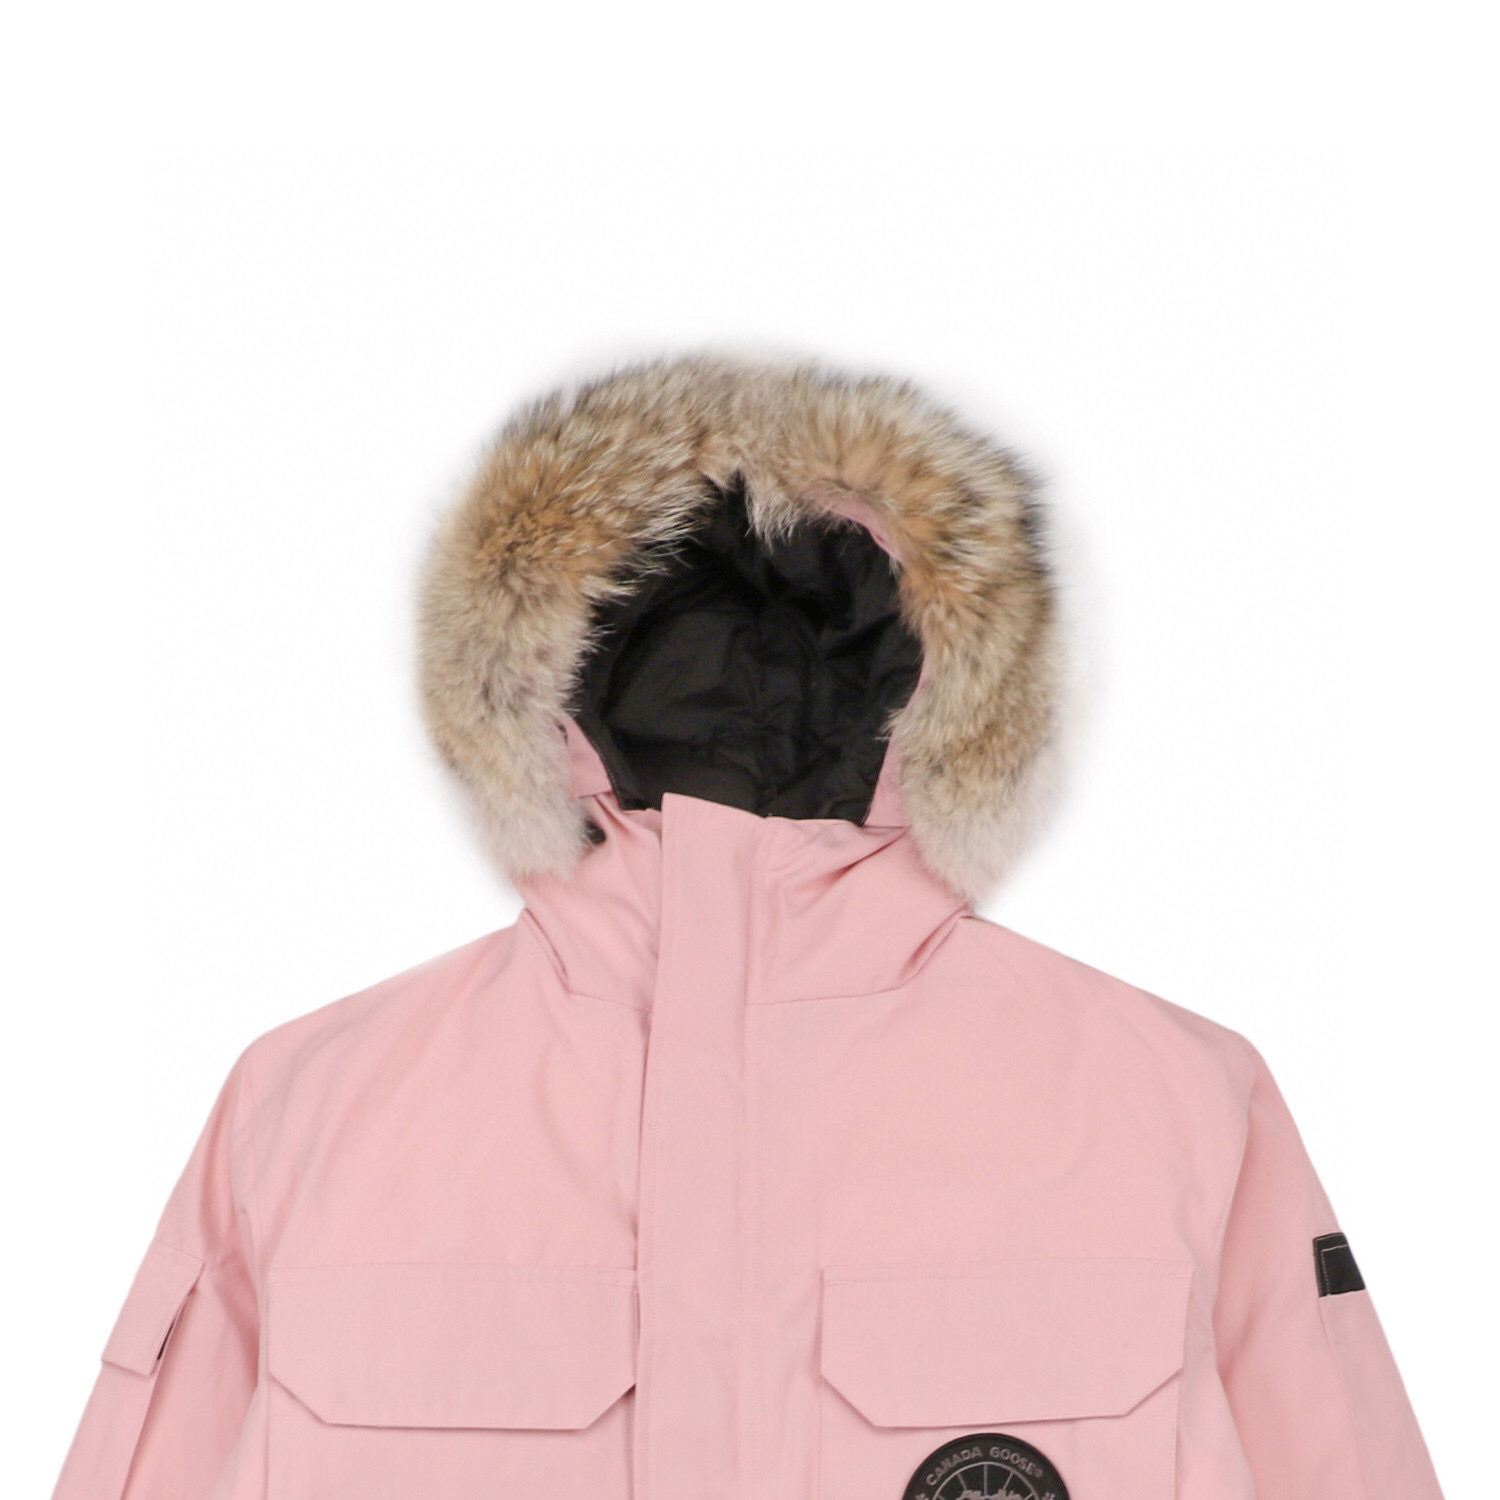 08 Canada Goose 19fw Expedition 4660ma Down Jacket Coat Pink (4) - newkick.org